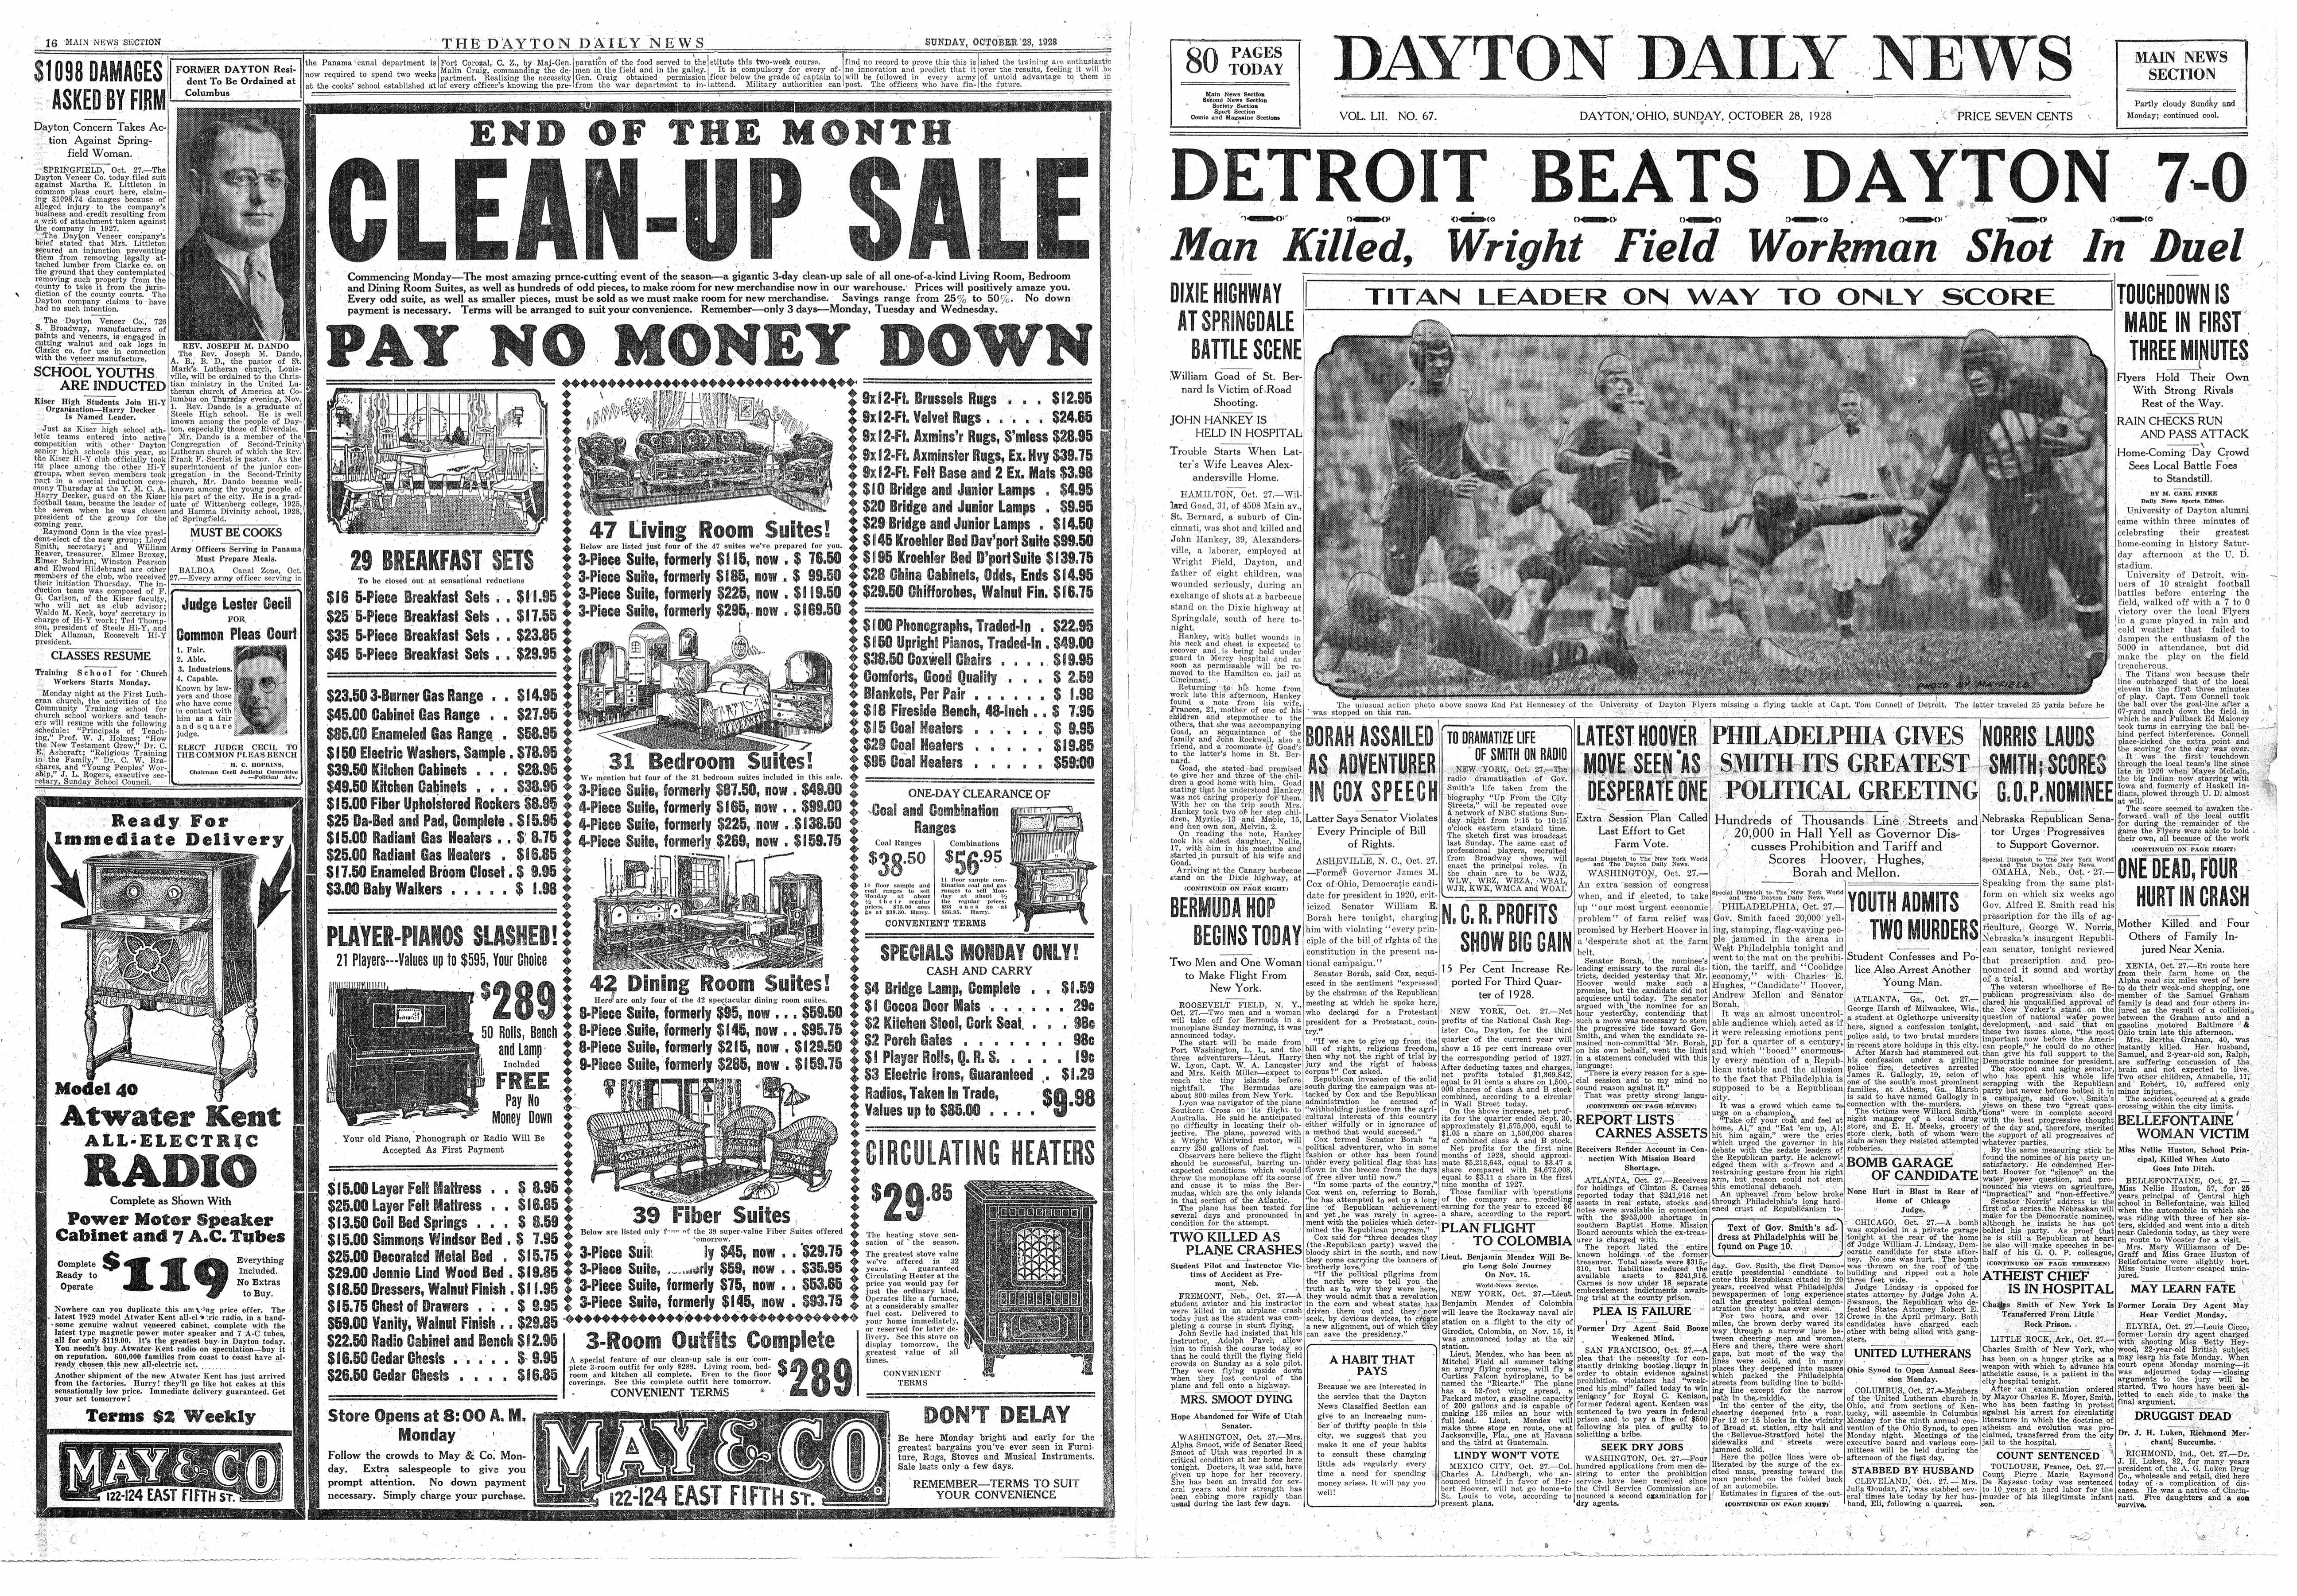 Sunday, October 28, 1928 issue of the Dayton Daily News from the FHS Time Capsule. Photo courtesy  of Dayton Public Schools Time Capsule Collection, Digitized by Vtechgraphics LLC copyright 2012 all rights reserved.